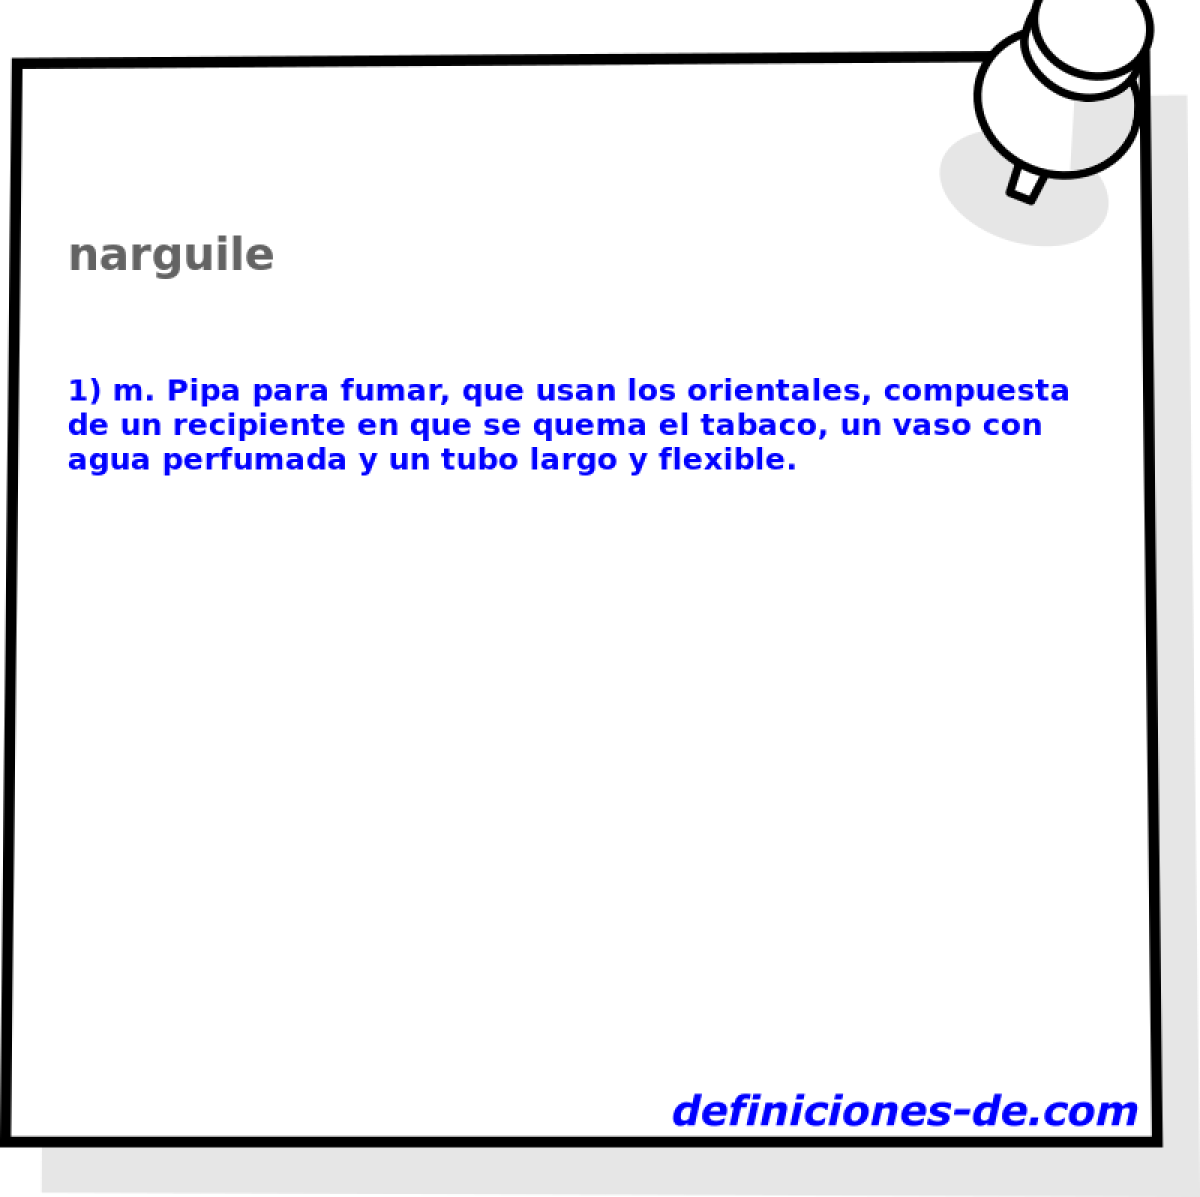 narguile 